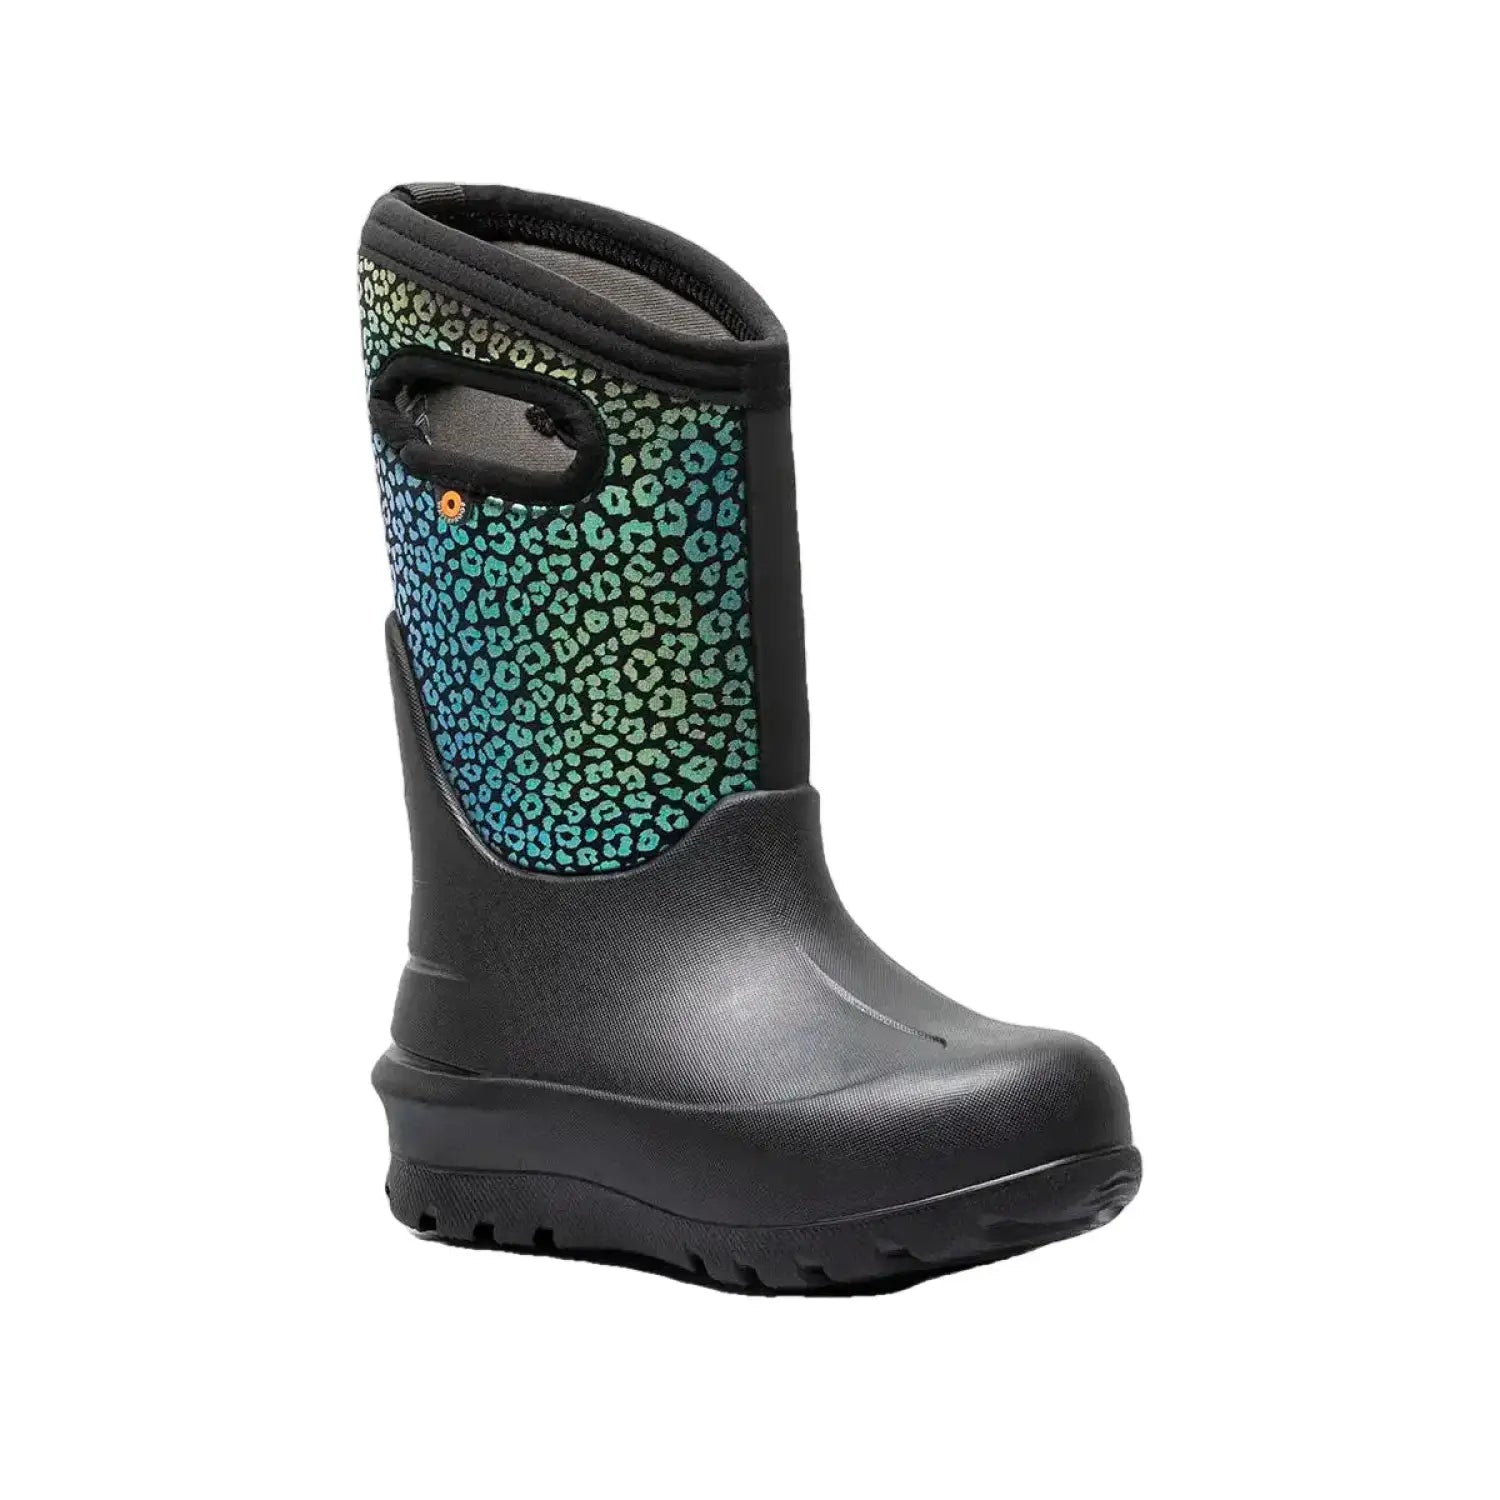 BOGS K's Neo Classic Rainbow Leopard, Black Multi, front and side view 